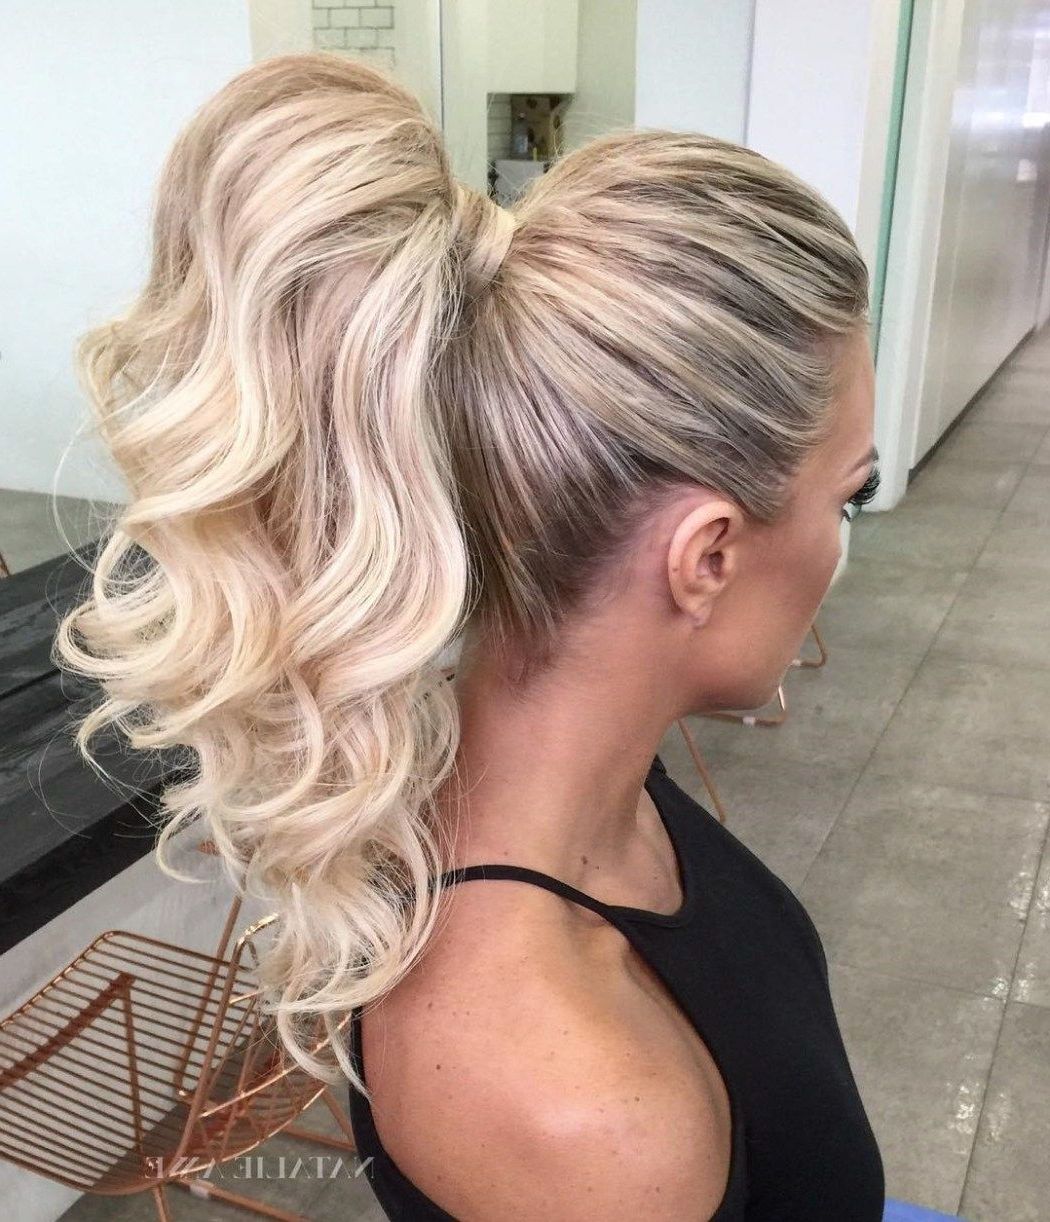 20 Ideas Of Blonde Flirty Teased Ponytail Hairstyles